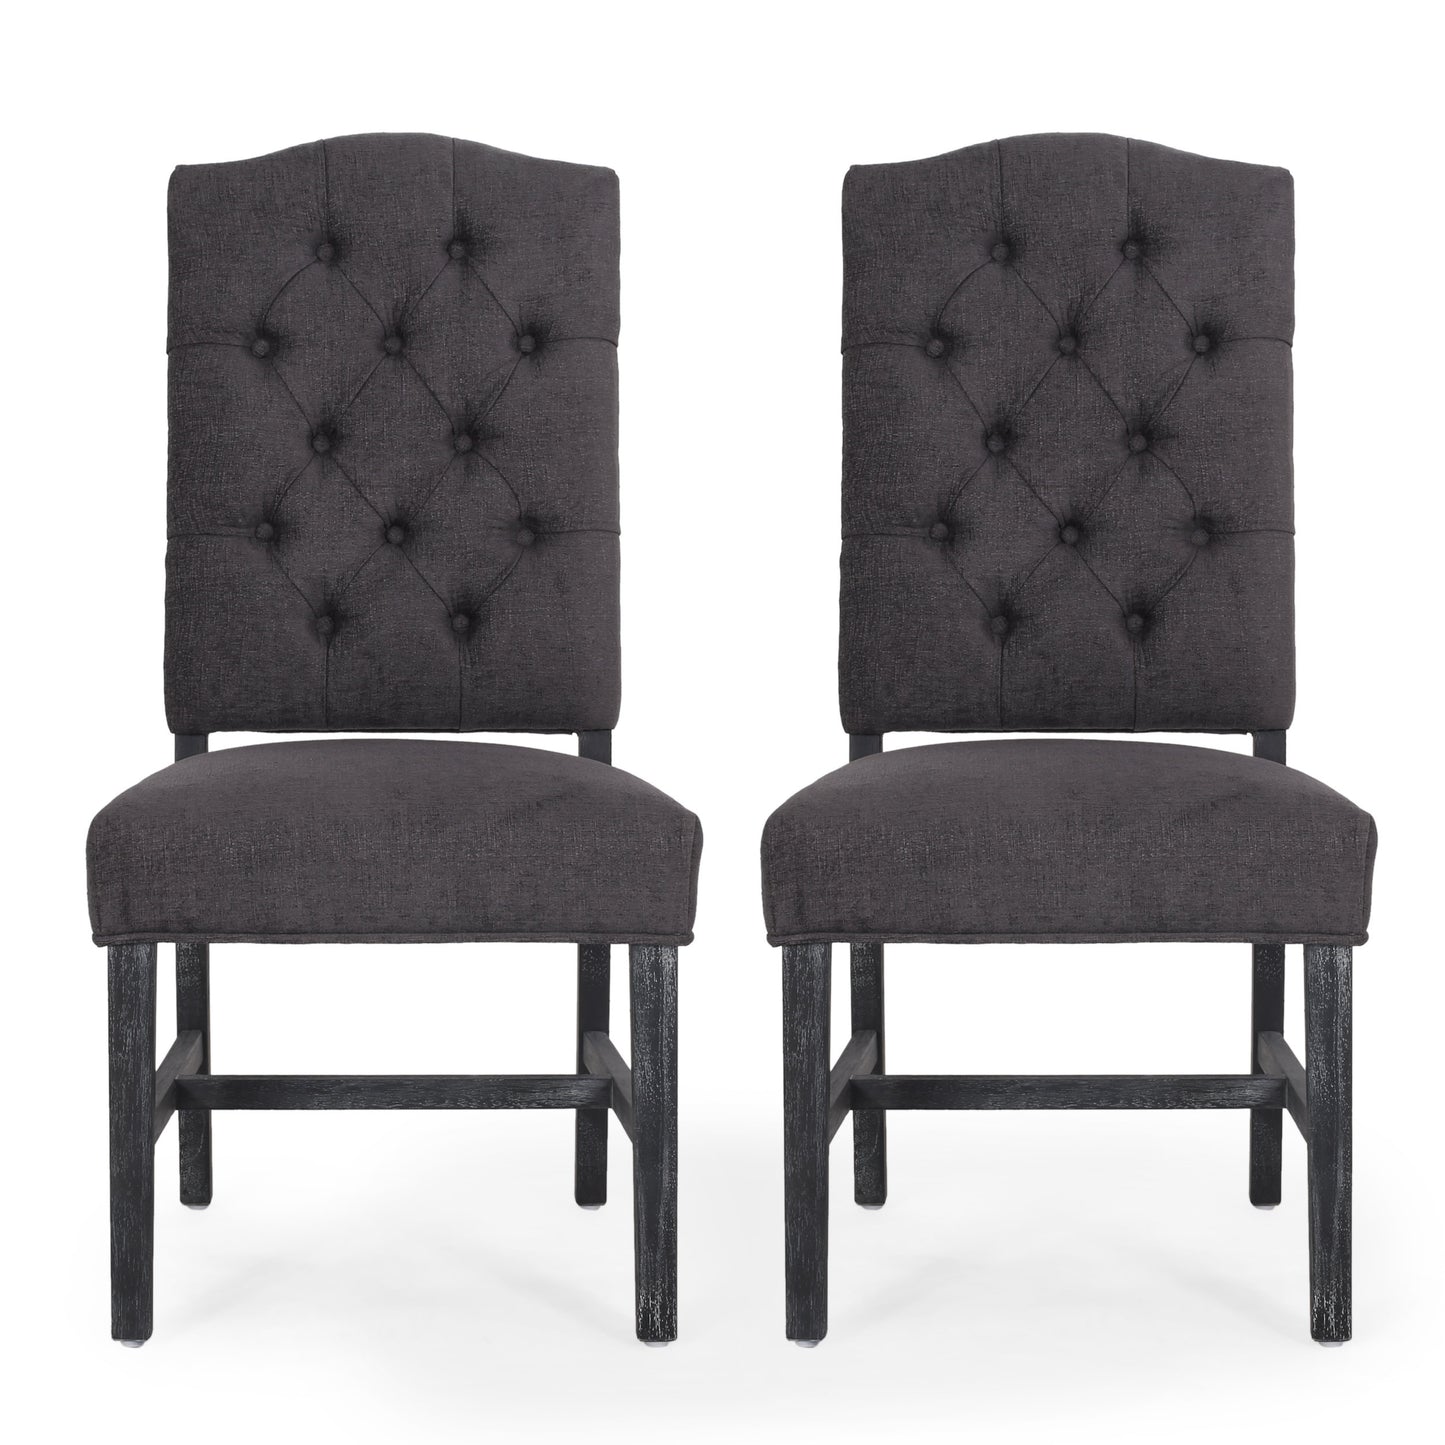 Loyning Contemporary Tufted Dining Chairs, Set of 2